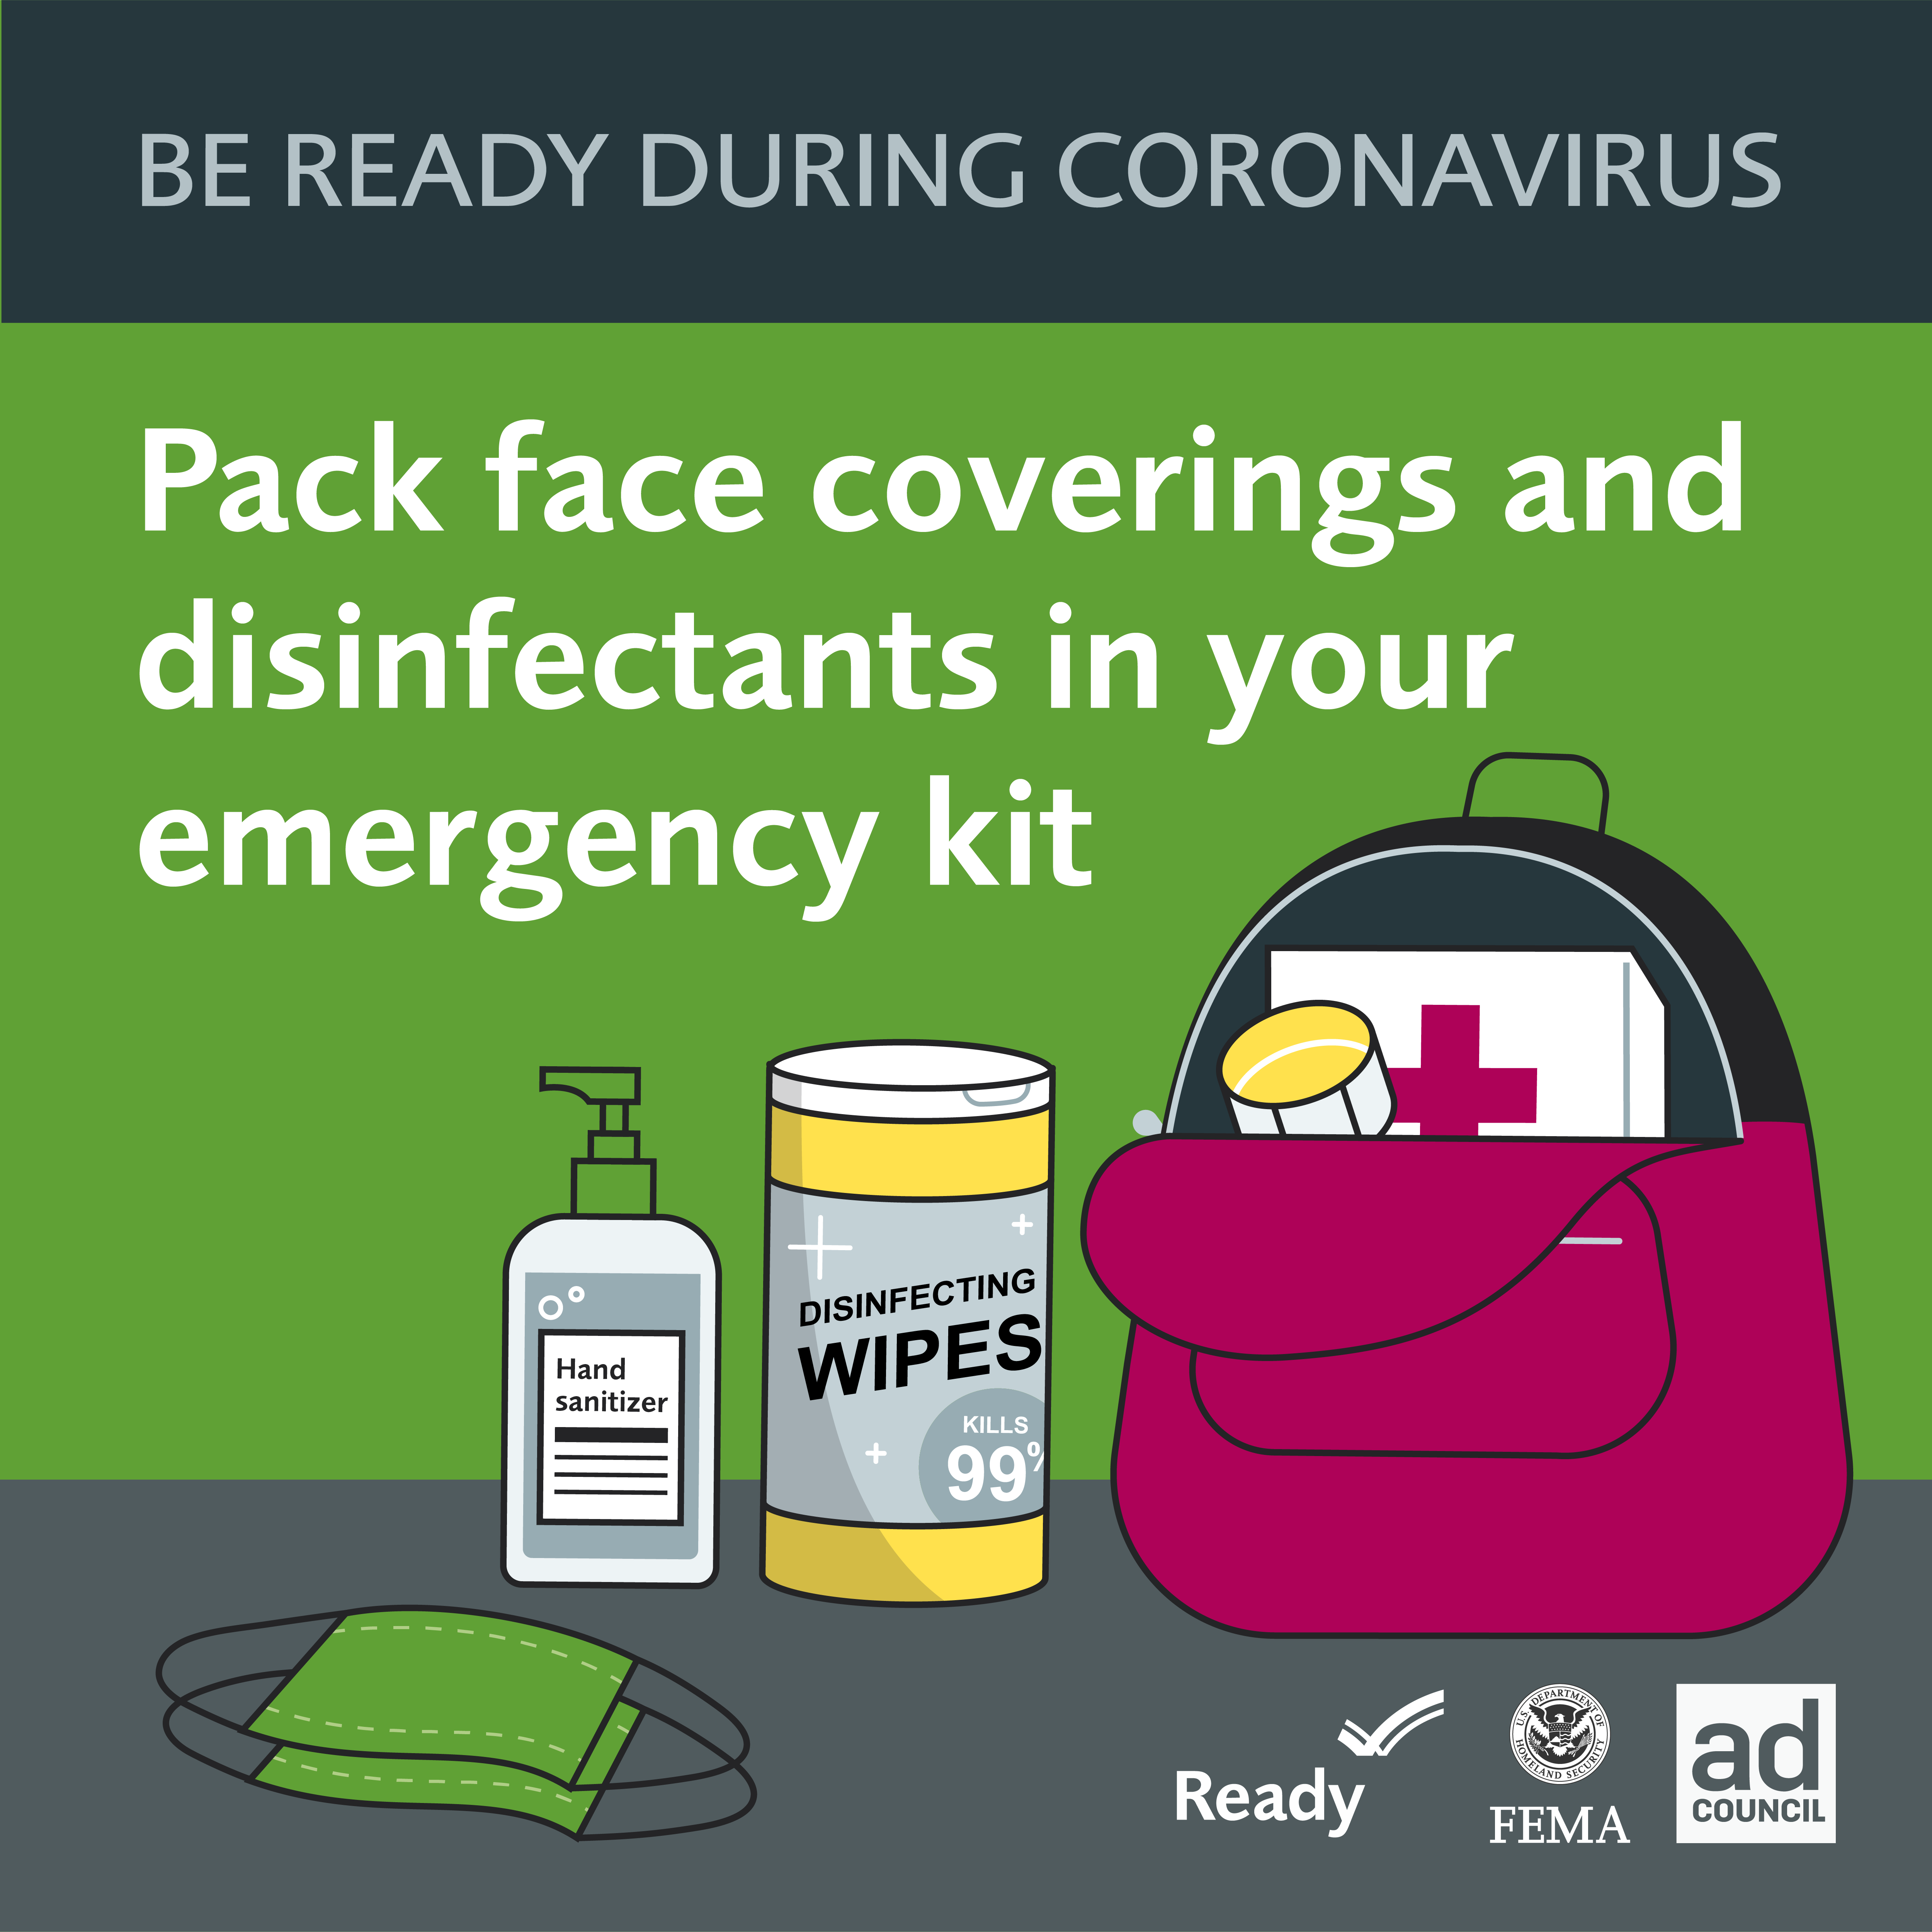 Pack face coverings and disinfectants in your emergency kit